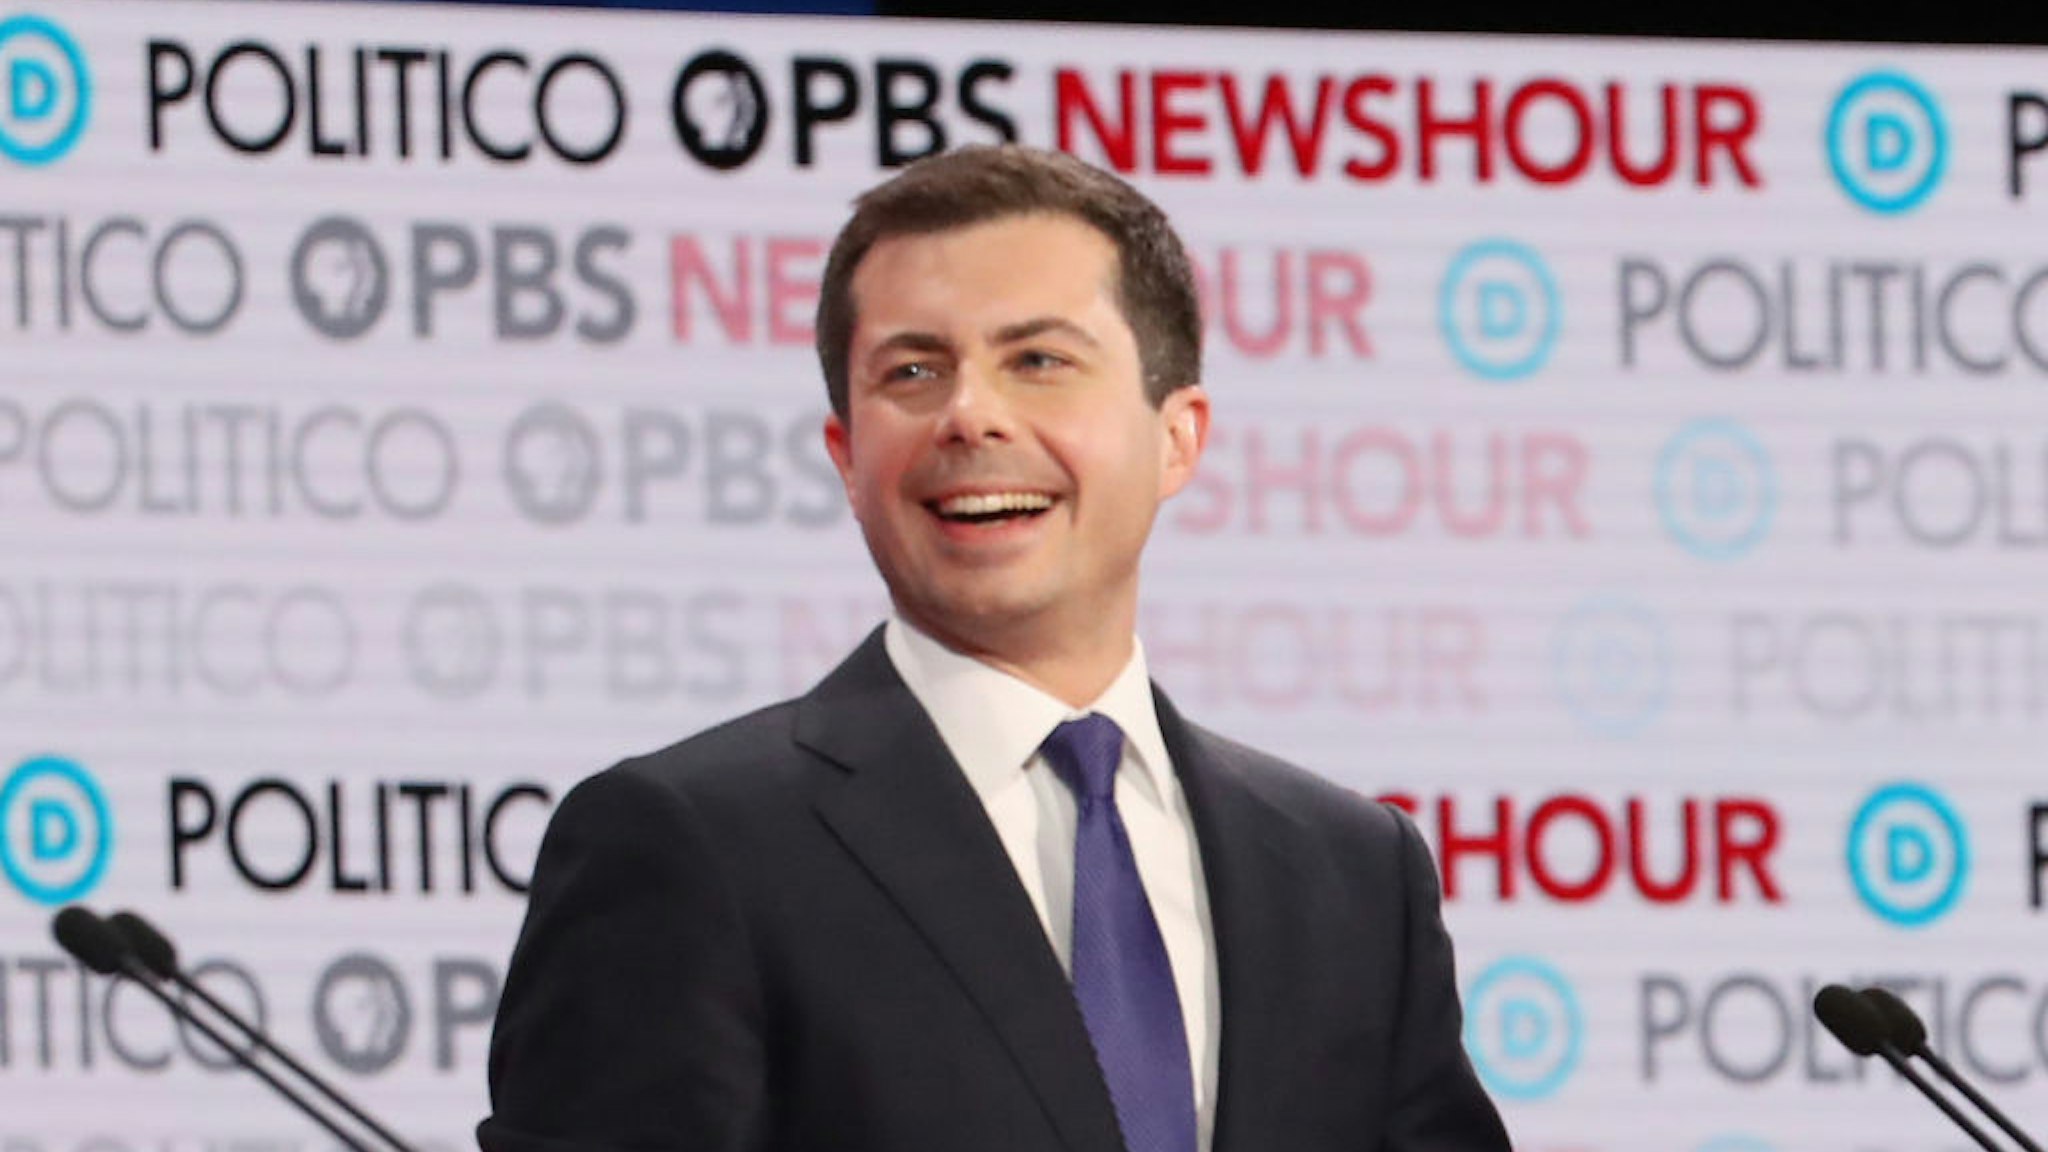 LOS ANGELES, CALIFORNIA - DECEMBER 19: Democratic presidential candidate South Bend, Indiana Mayor Pete Buttigieg reacts during the Democratic presidential primary debate at Loyola Marymount University on December 19, 2019 in Los Angeles, California. Seven candidates out of the crowded field qualified for the 6th and last Democratic presidential primary debate of 2019 hosted by PBS NewsHour and Politico.